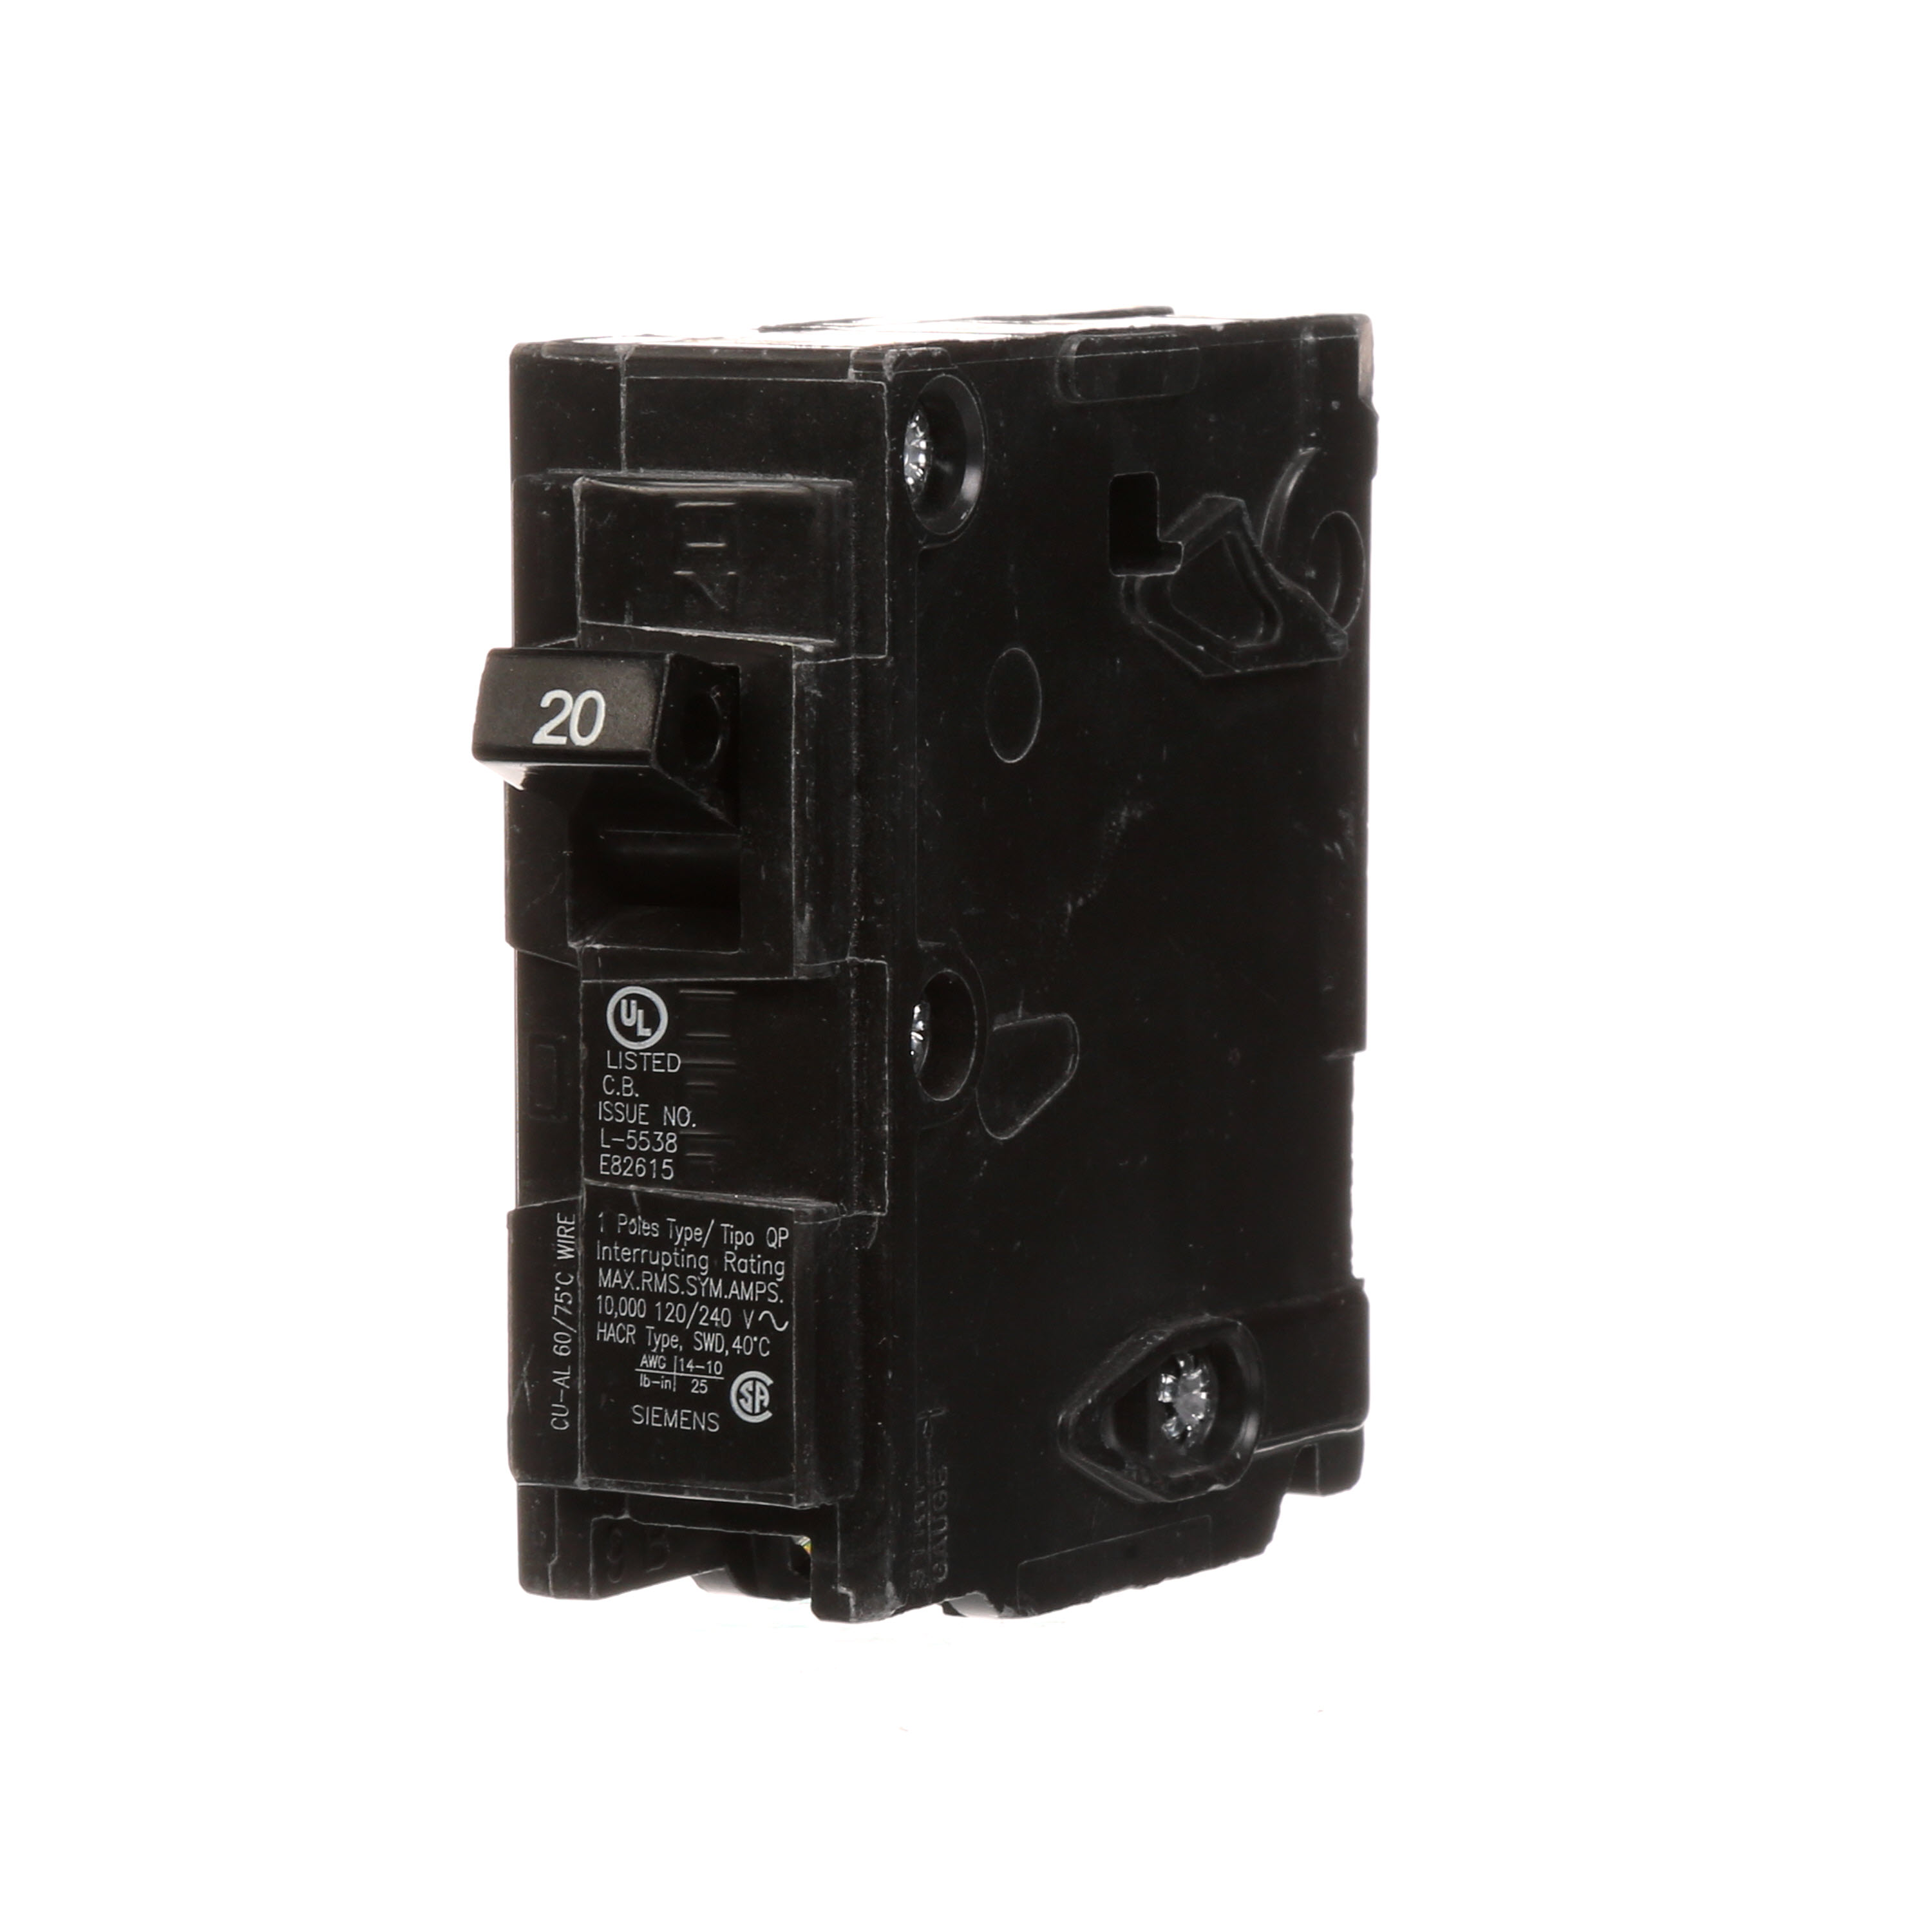 Siemens Q115 Molded Case Circuit Breaker With Insta-Wire, 120 VAC, 15 A, 10 kA Interrupt, 1 Poles, Thermal/Magnetic Trip